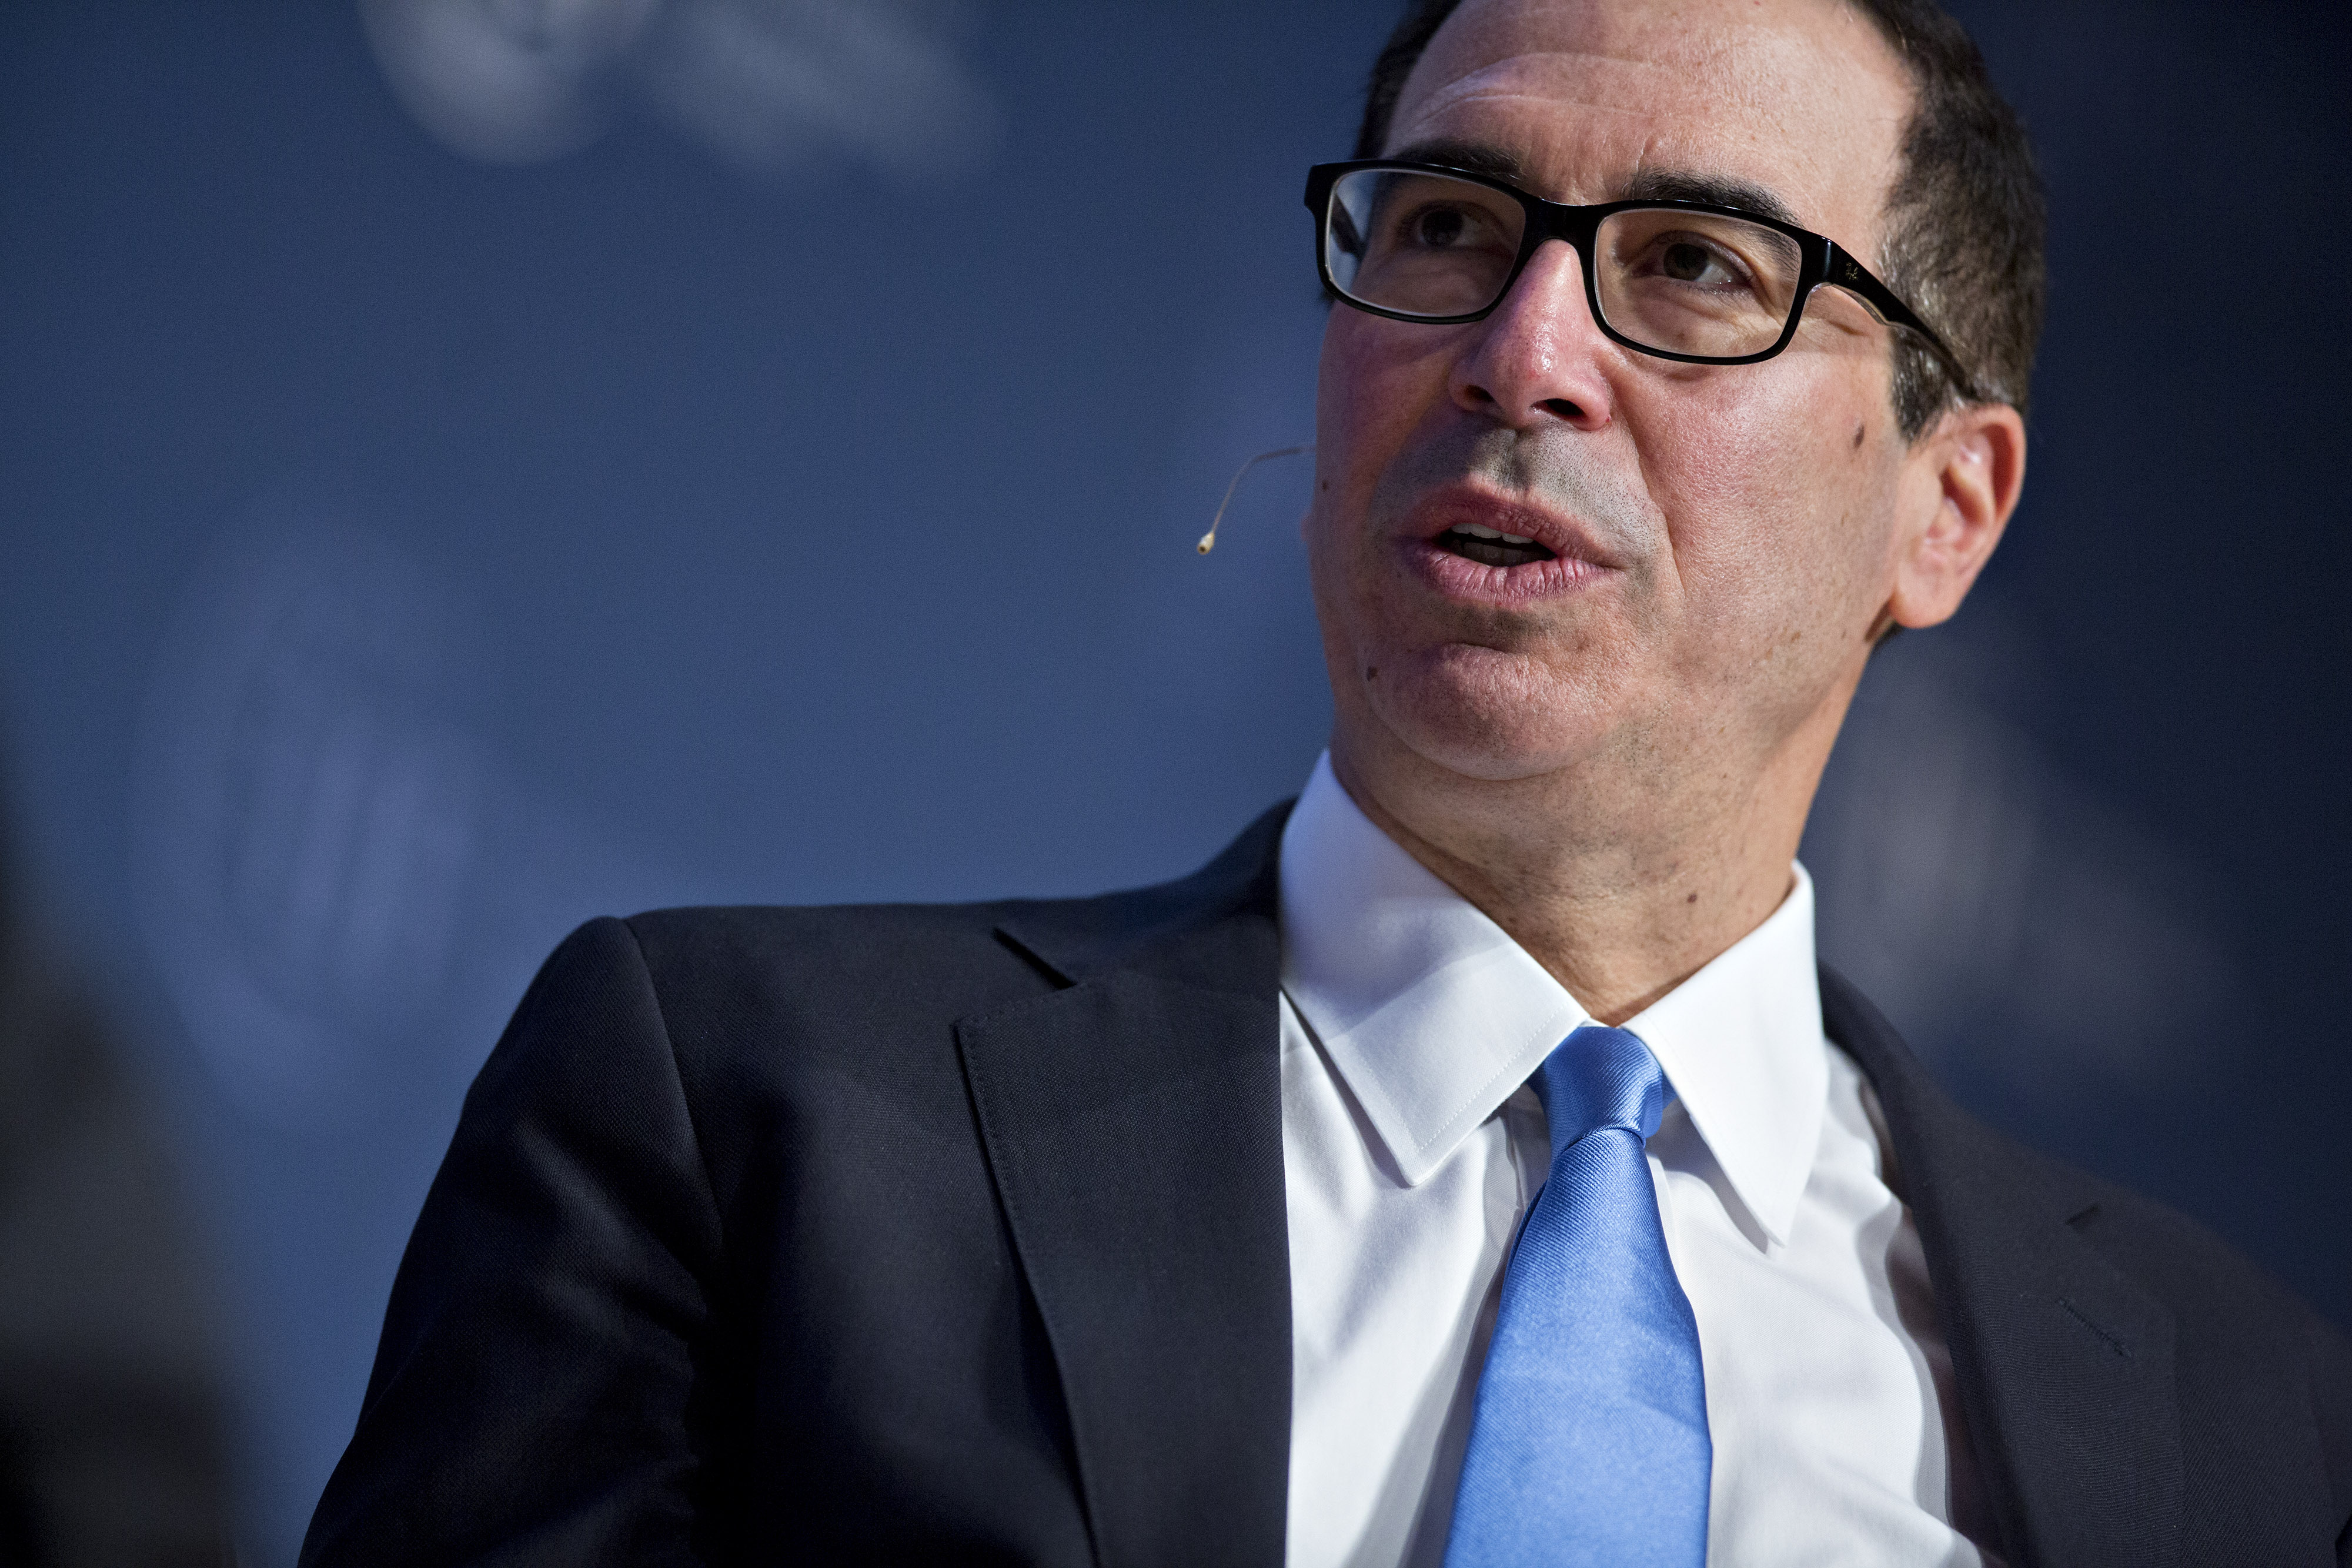 Steven Mnuchin, U.S. Treasury secretary, speaks during a discussion at the Institute of International Finance (IIF) policy summit in Washington, D.C., U.S., on Thursday, April 20, 2017. (Photograph by Andrew Harrer—Getty/Bloomberg)